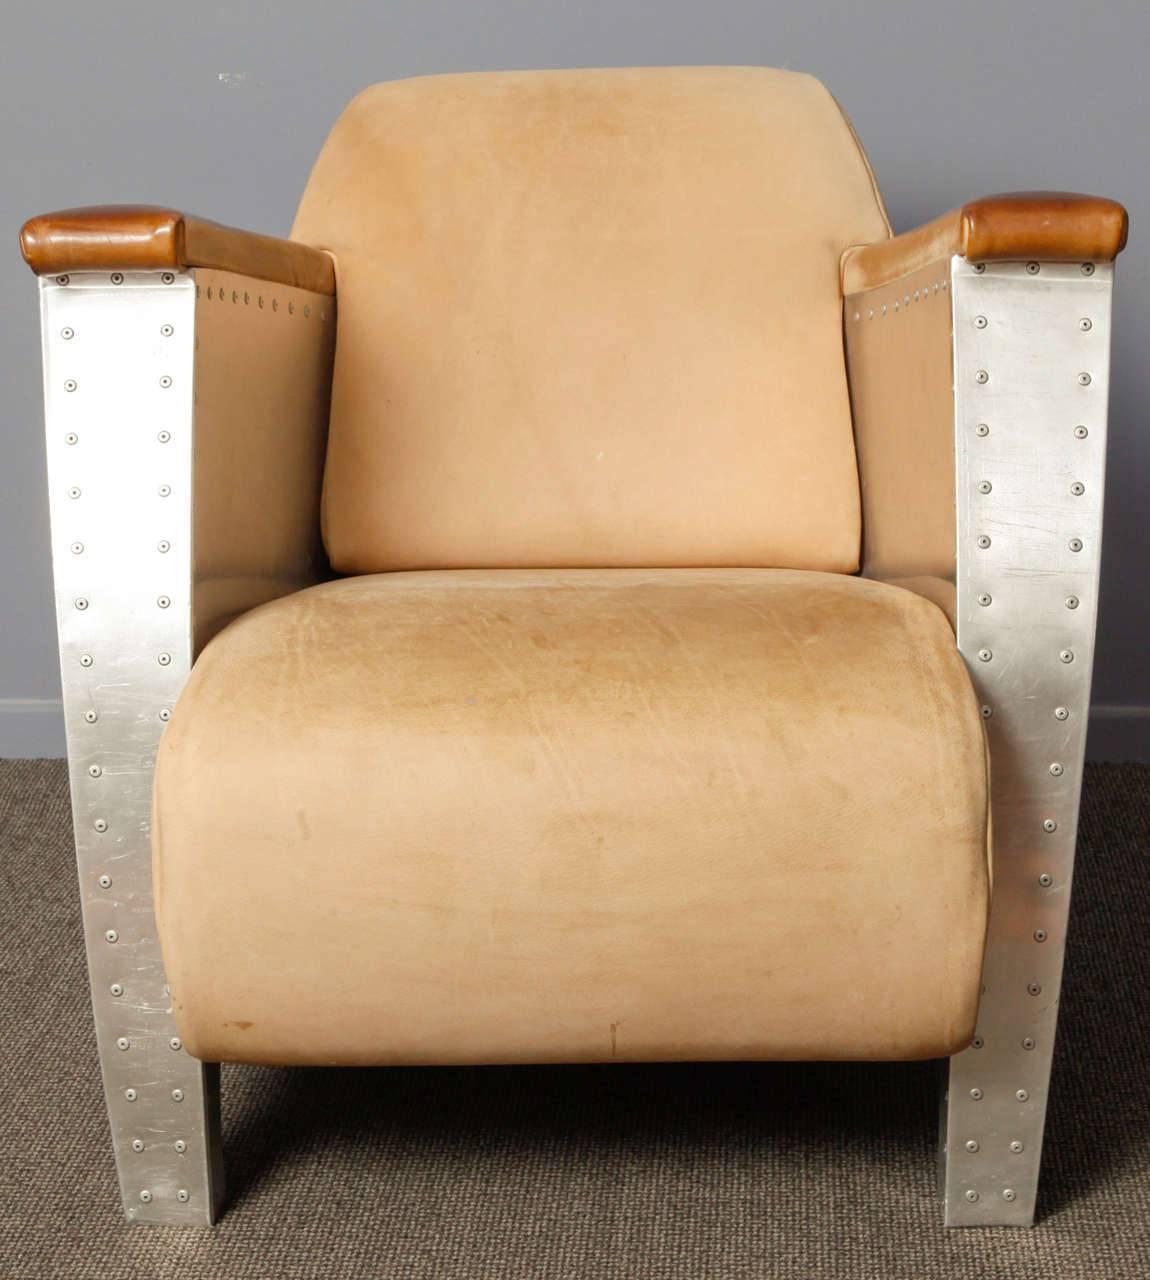 A very interesting combination between comfort and design. Deco chair in metal and leather upholstery.